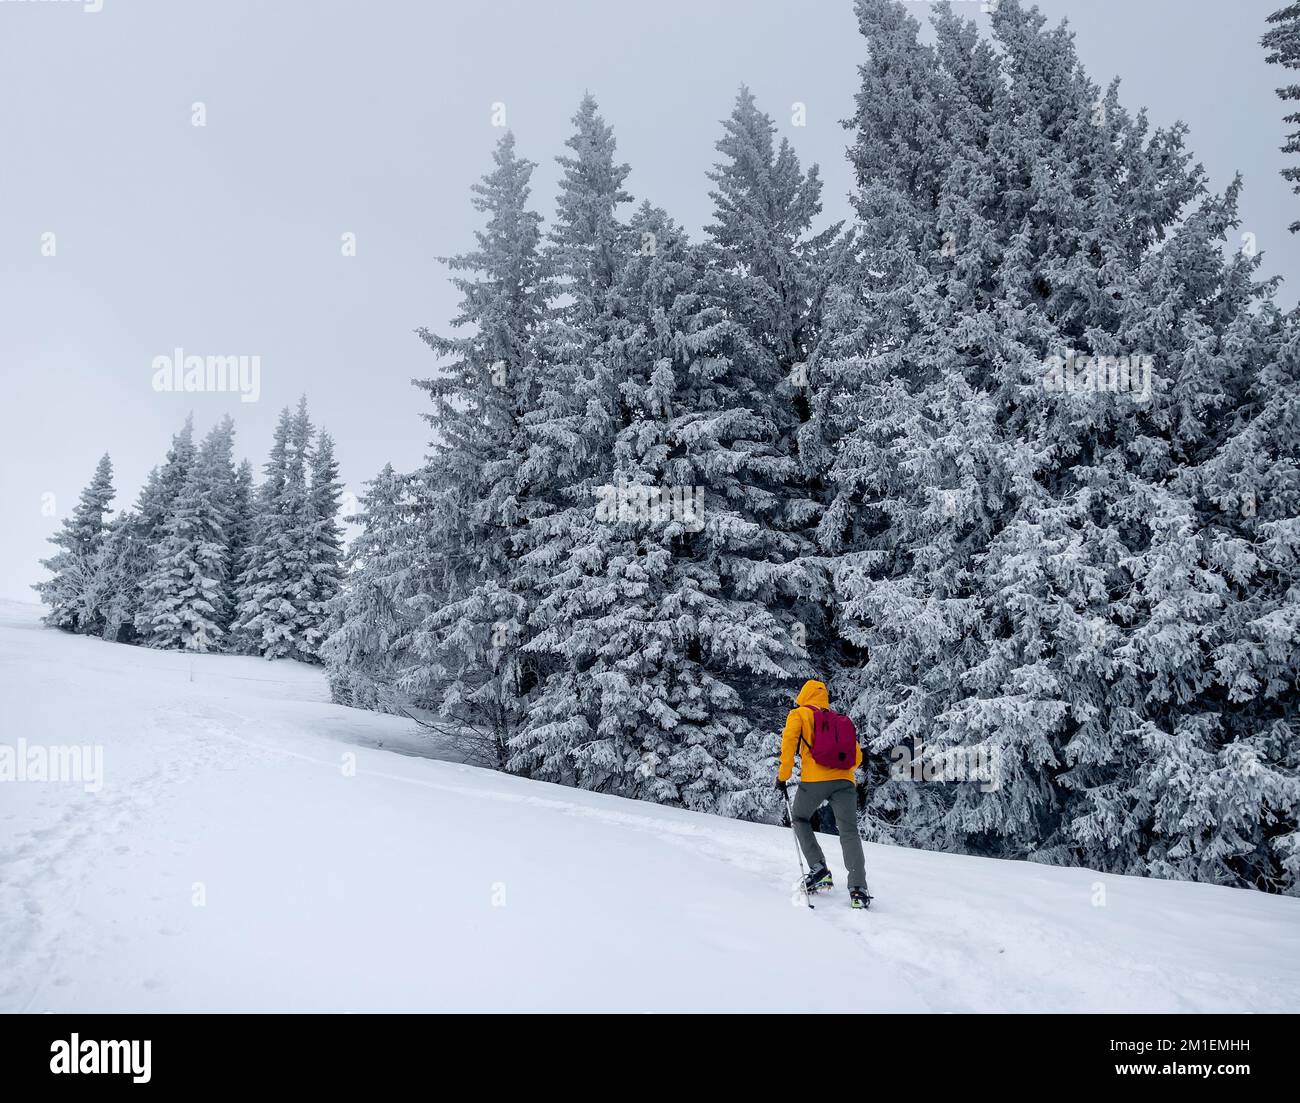 Lonely mountaineer dressed bright orange softshell jacket going up the snowy hill between spruces trees. Active people concept image on Velky Krivan, Stock Photo